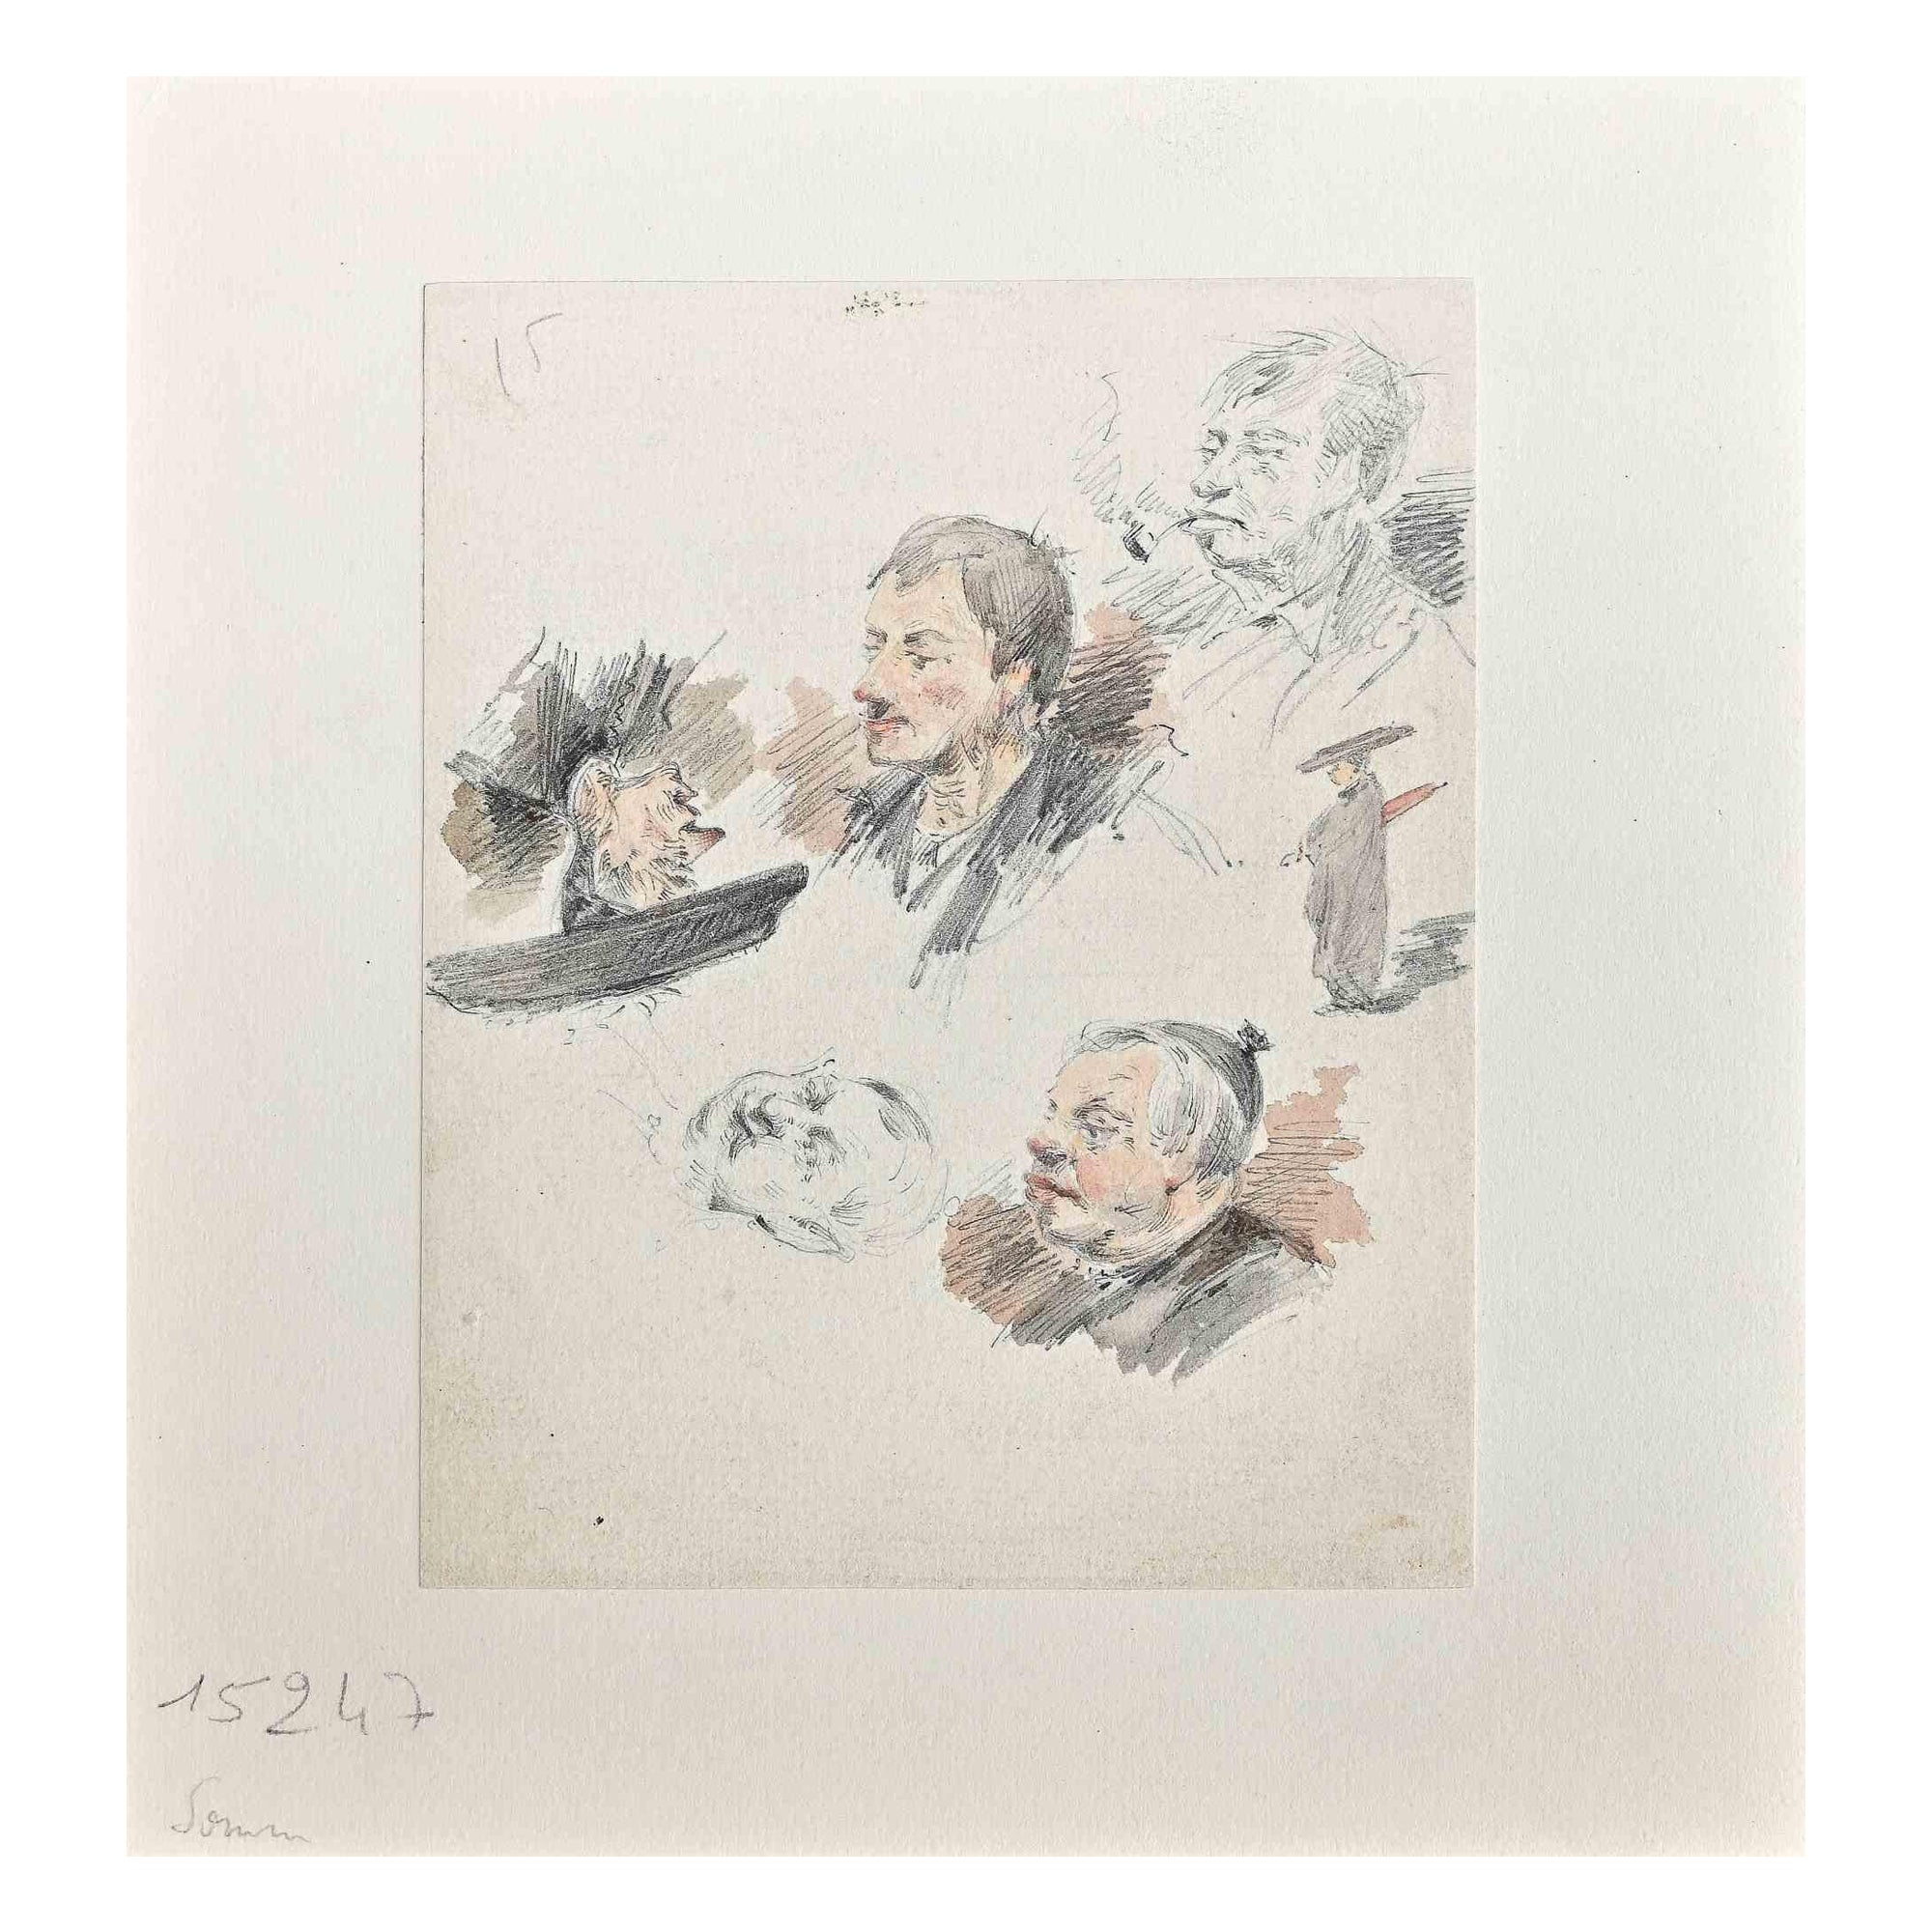 Henry Somm Figurative Art - Portraits - Original Drawing on Paper by H. Somm - Late 19th Century